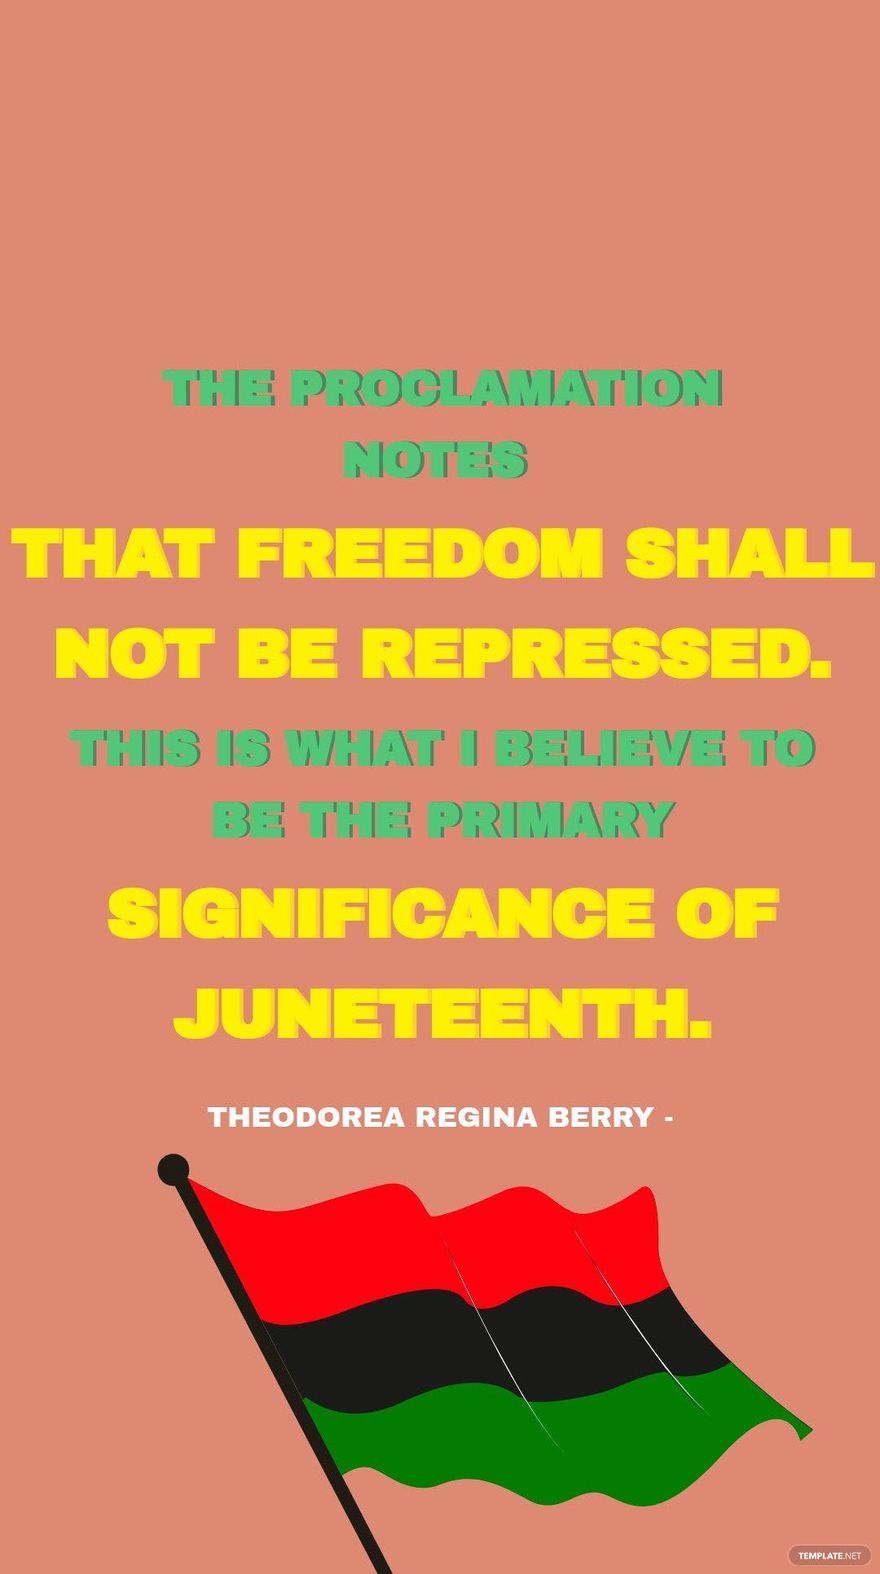 Theodorea Regina Berry - The proclamation notes that freedom shall not be repressed. This is what I believe to be the primary significance of Juneteenth.